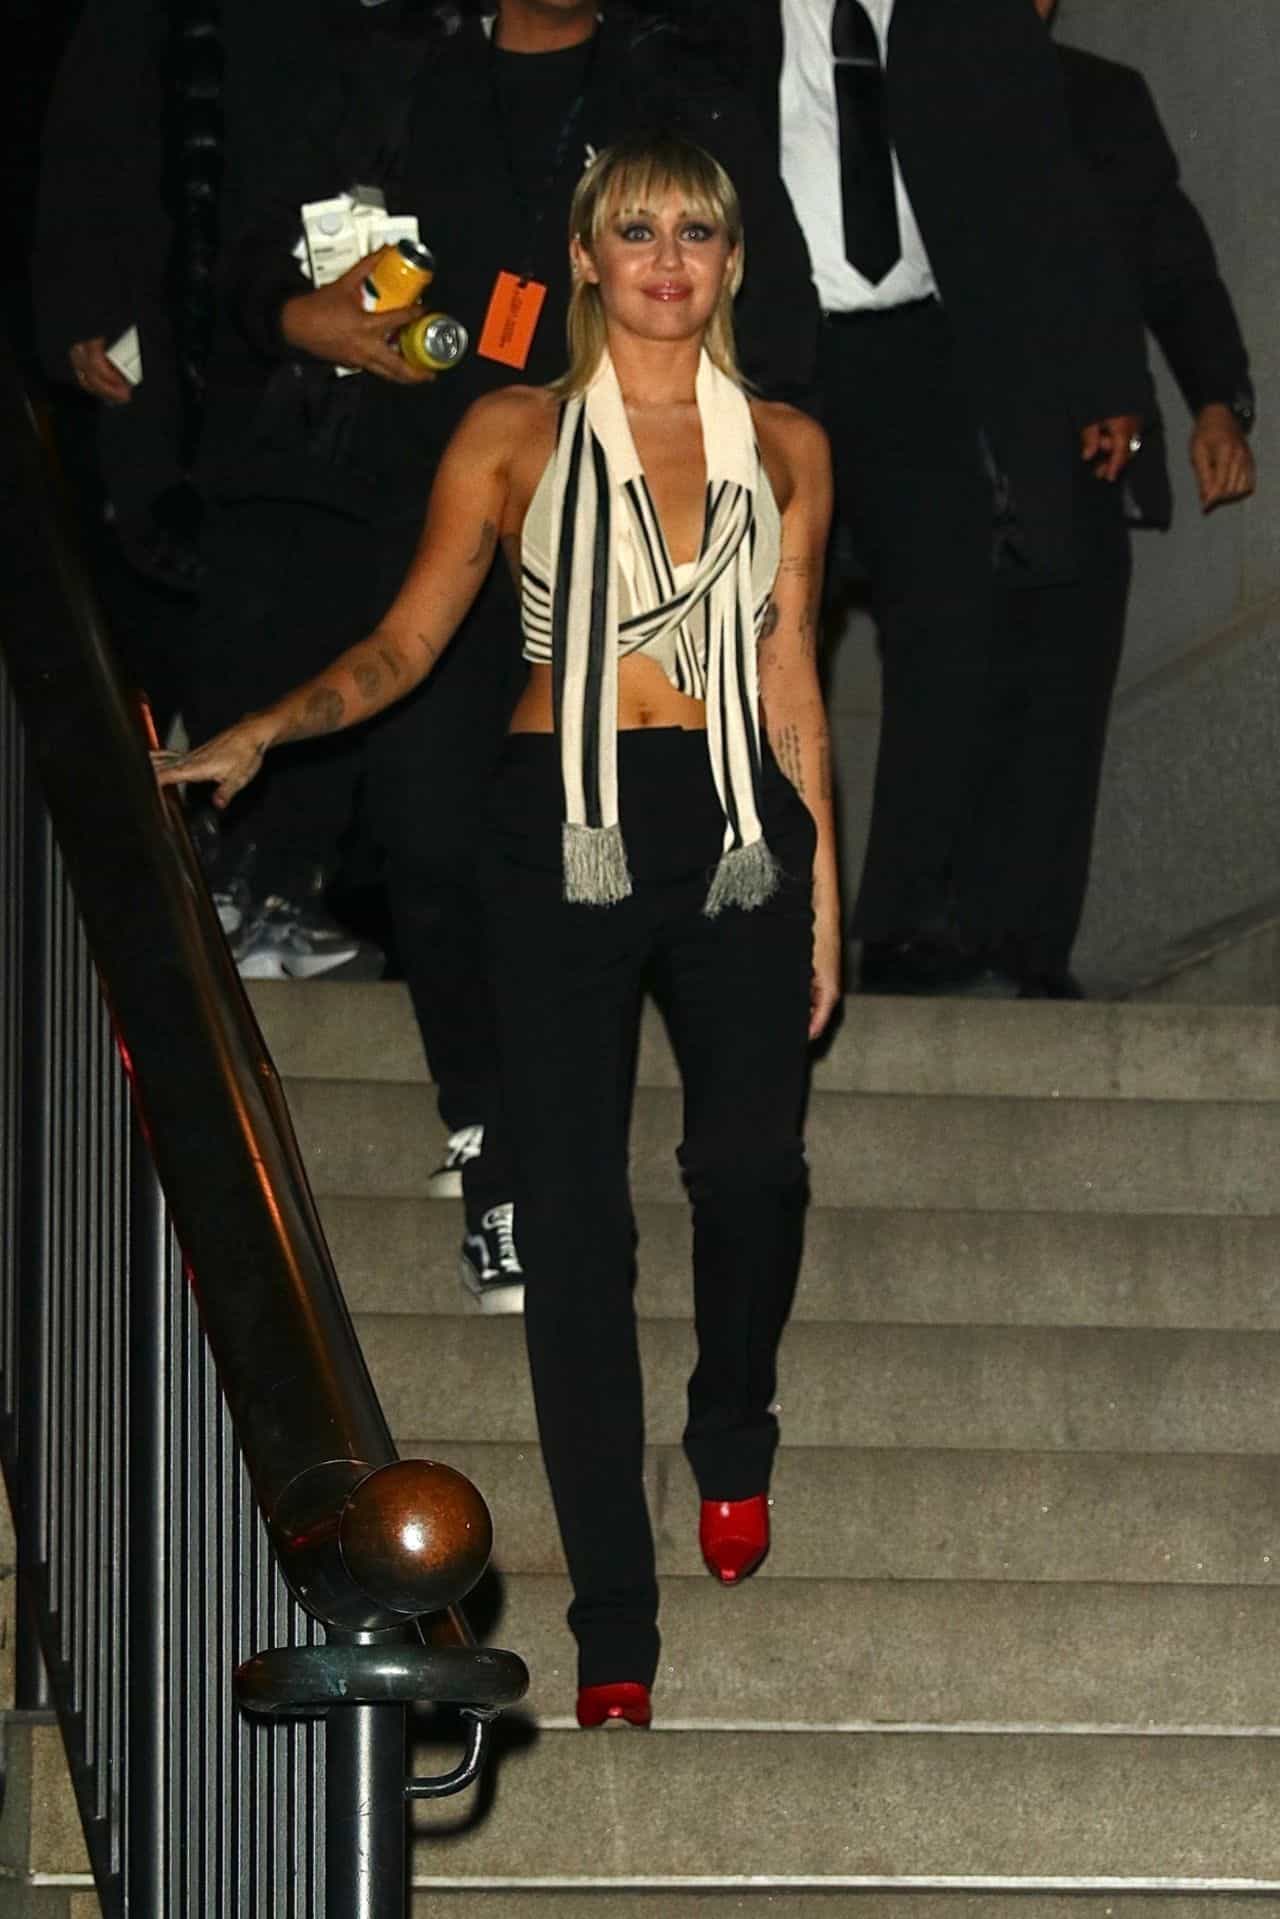 Miley Cyrus Brings Chic and Edgy Style to New York Fashion Week